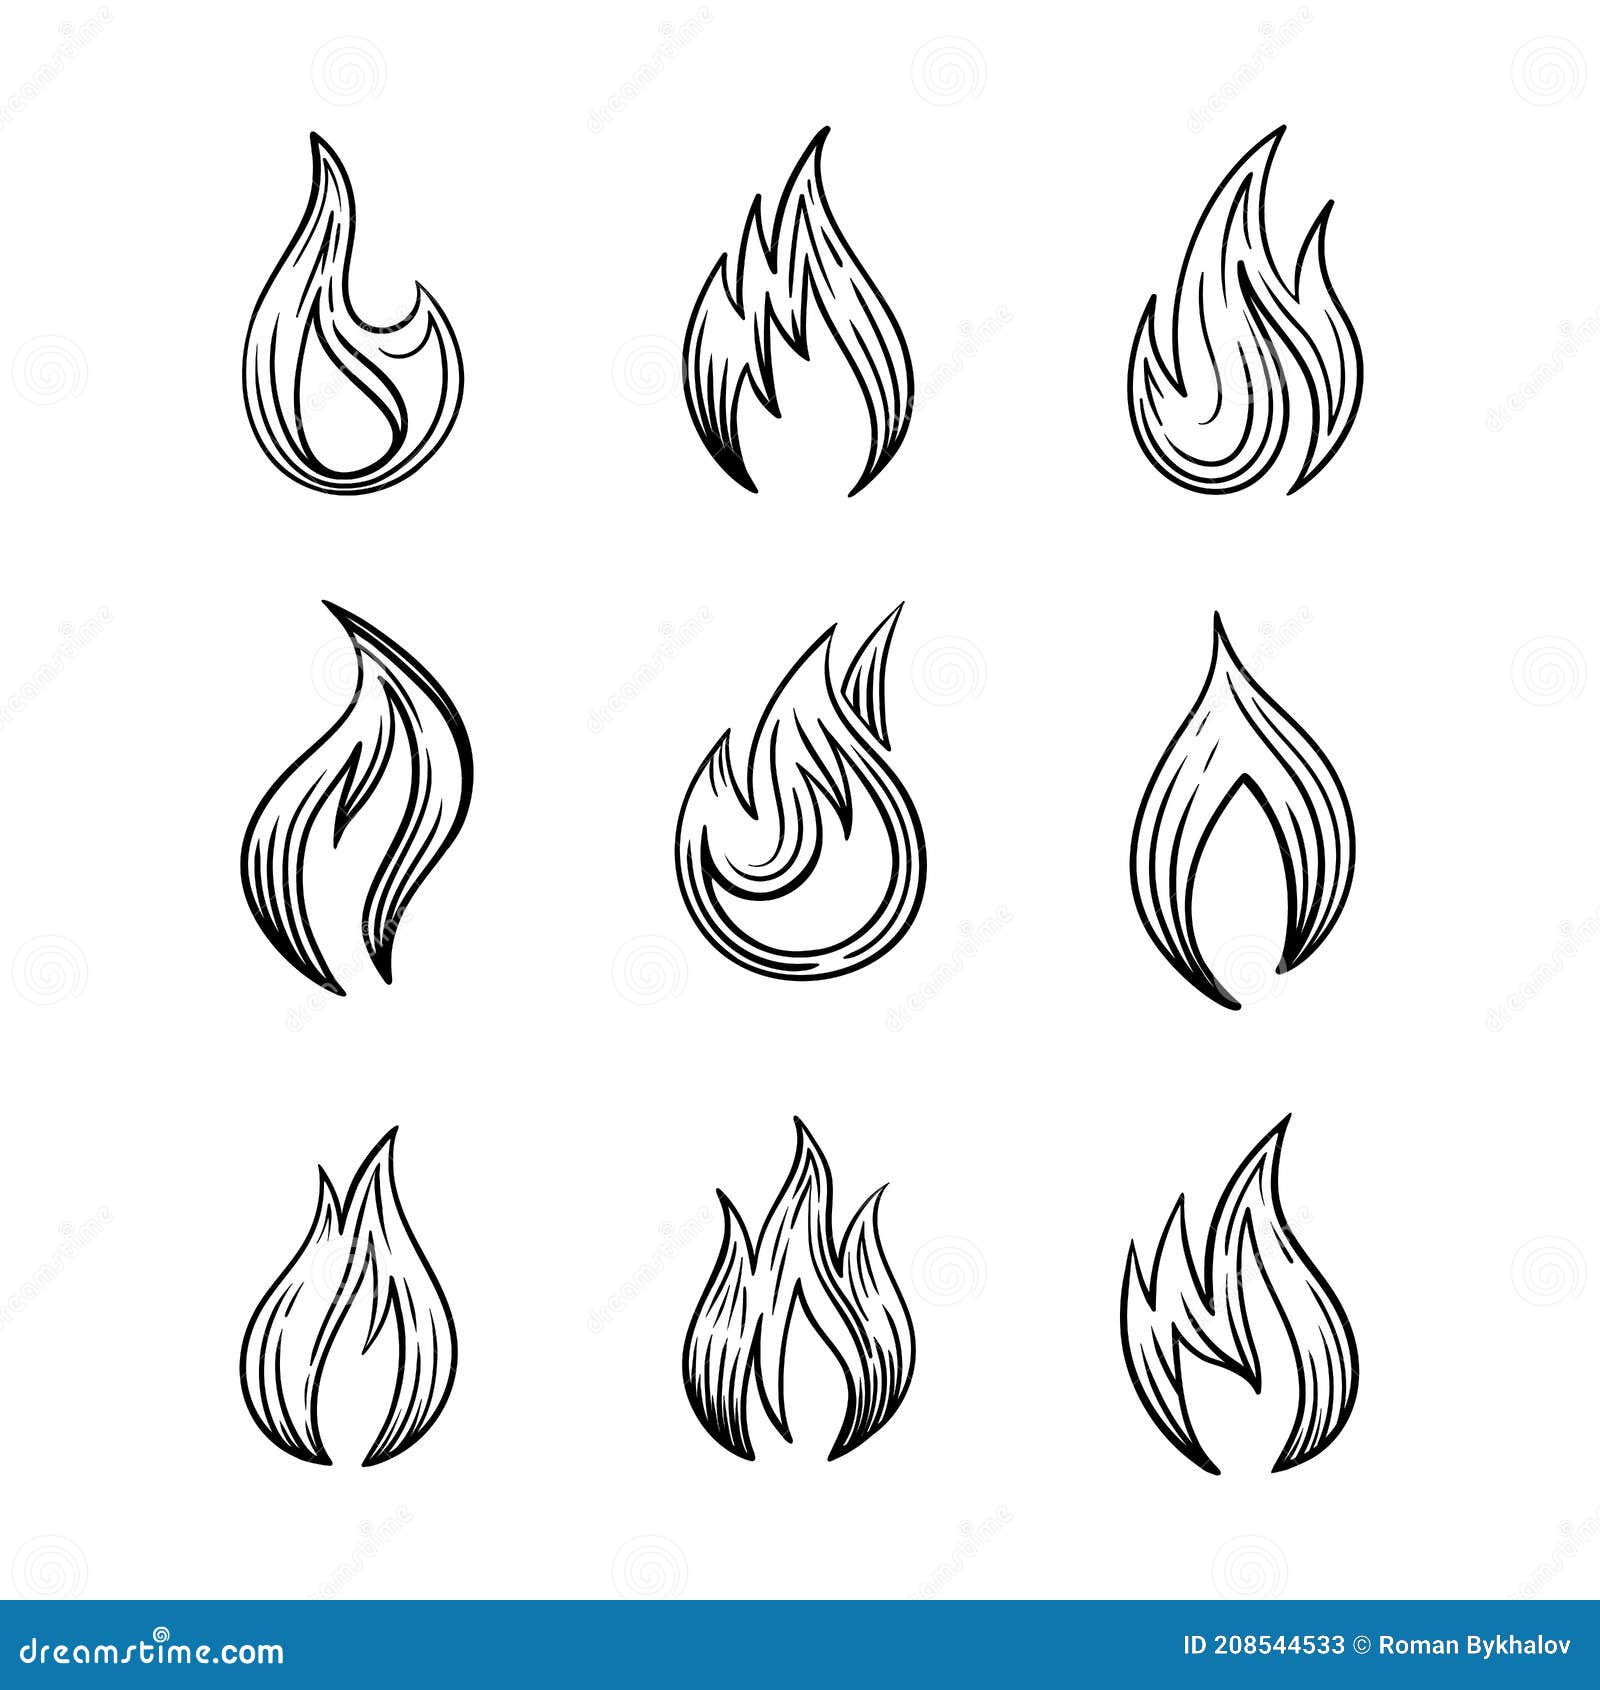 Colored flame fire. It can be used for tattoos and other designs